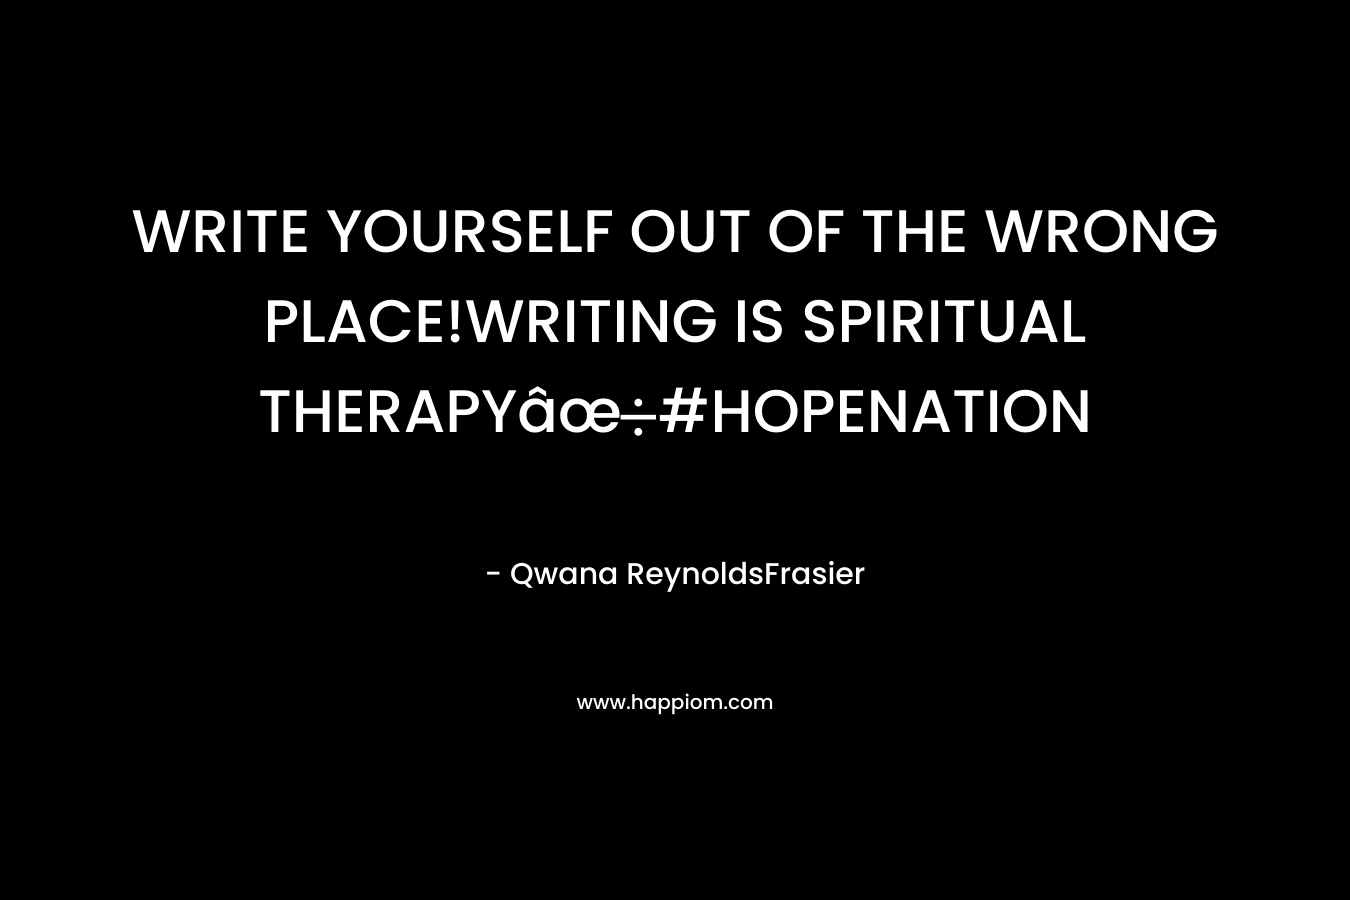 WRITE YOURSELF OUT OF THE WRONG PLACE!WRITING IS SPIRITUAL THERAPYâœ#HOPENATION – Qwana ReynoldsFrasier